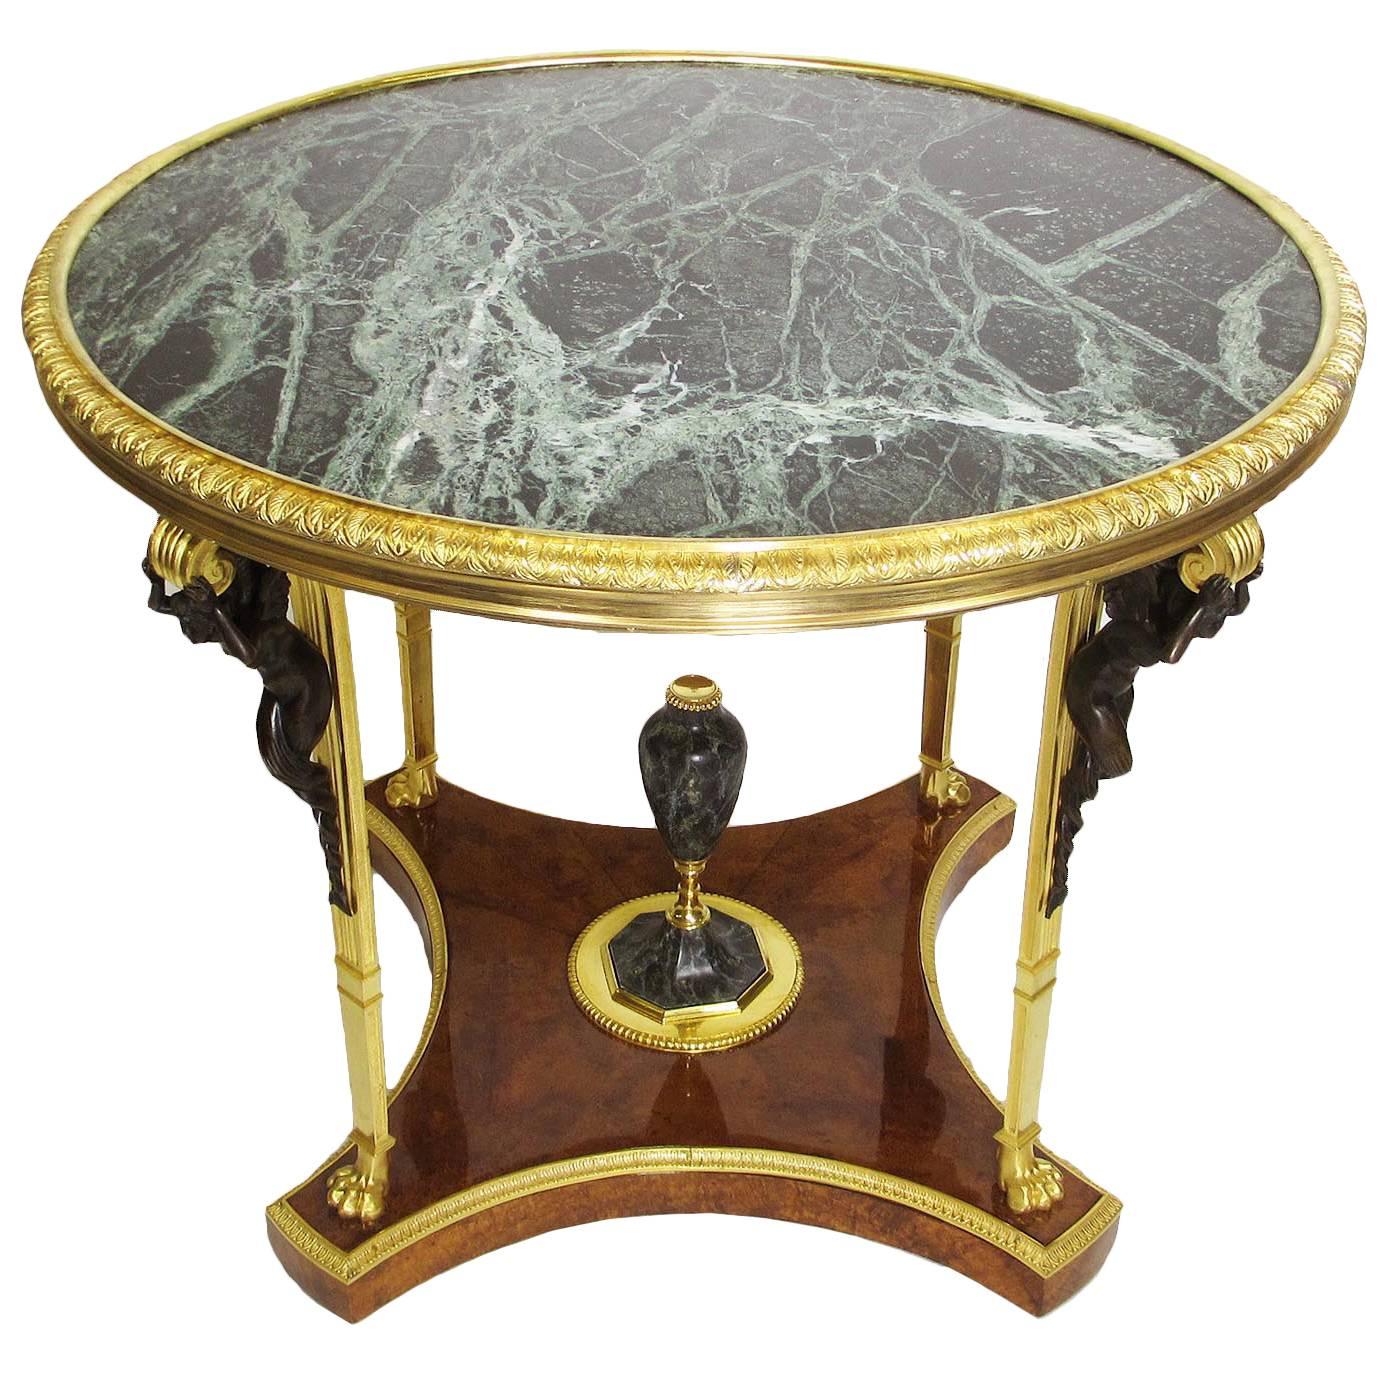 A Fine French Early 20th Century Gilt-Bronze Center Table Attr. Francois Linke